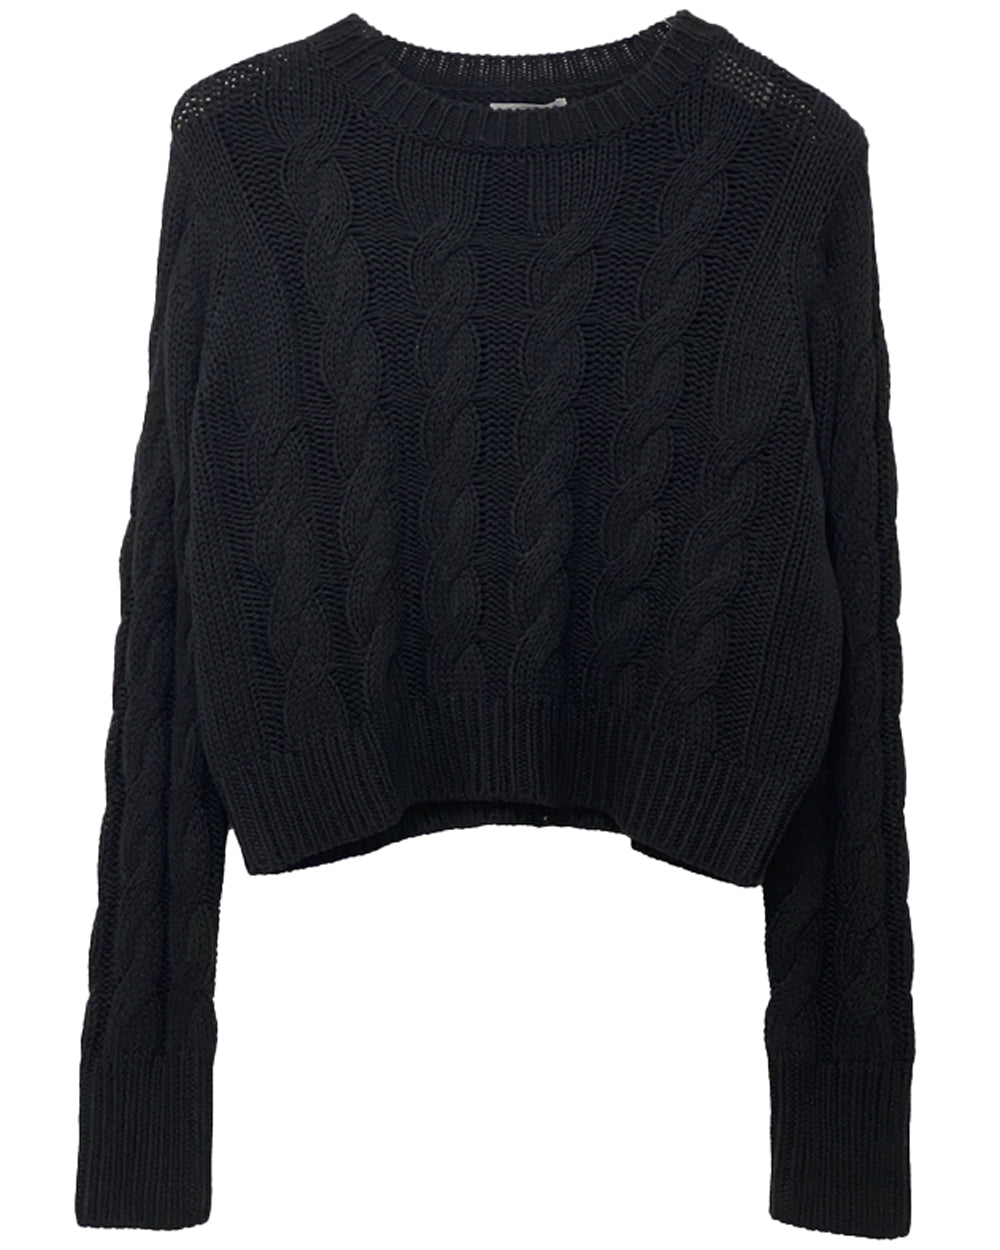 Black Cable Knit Sydney Sweater